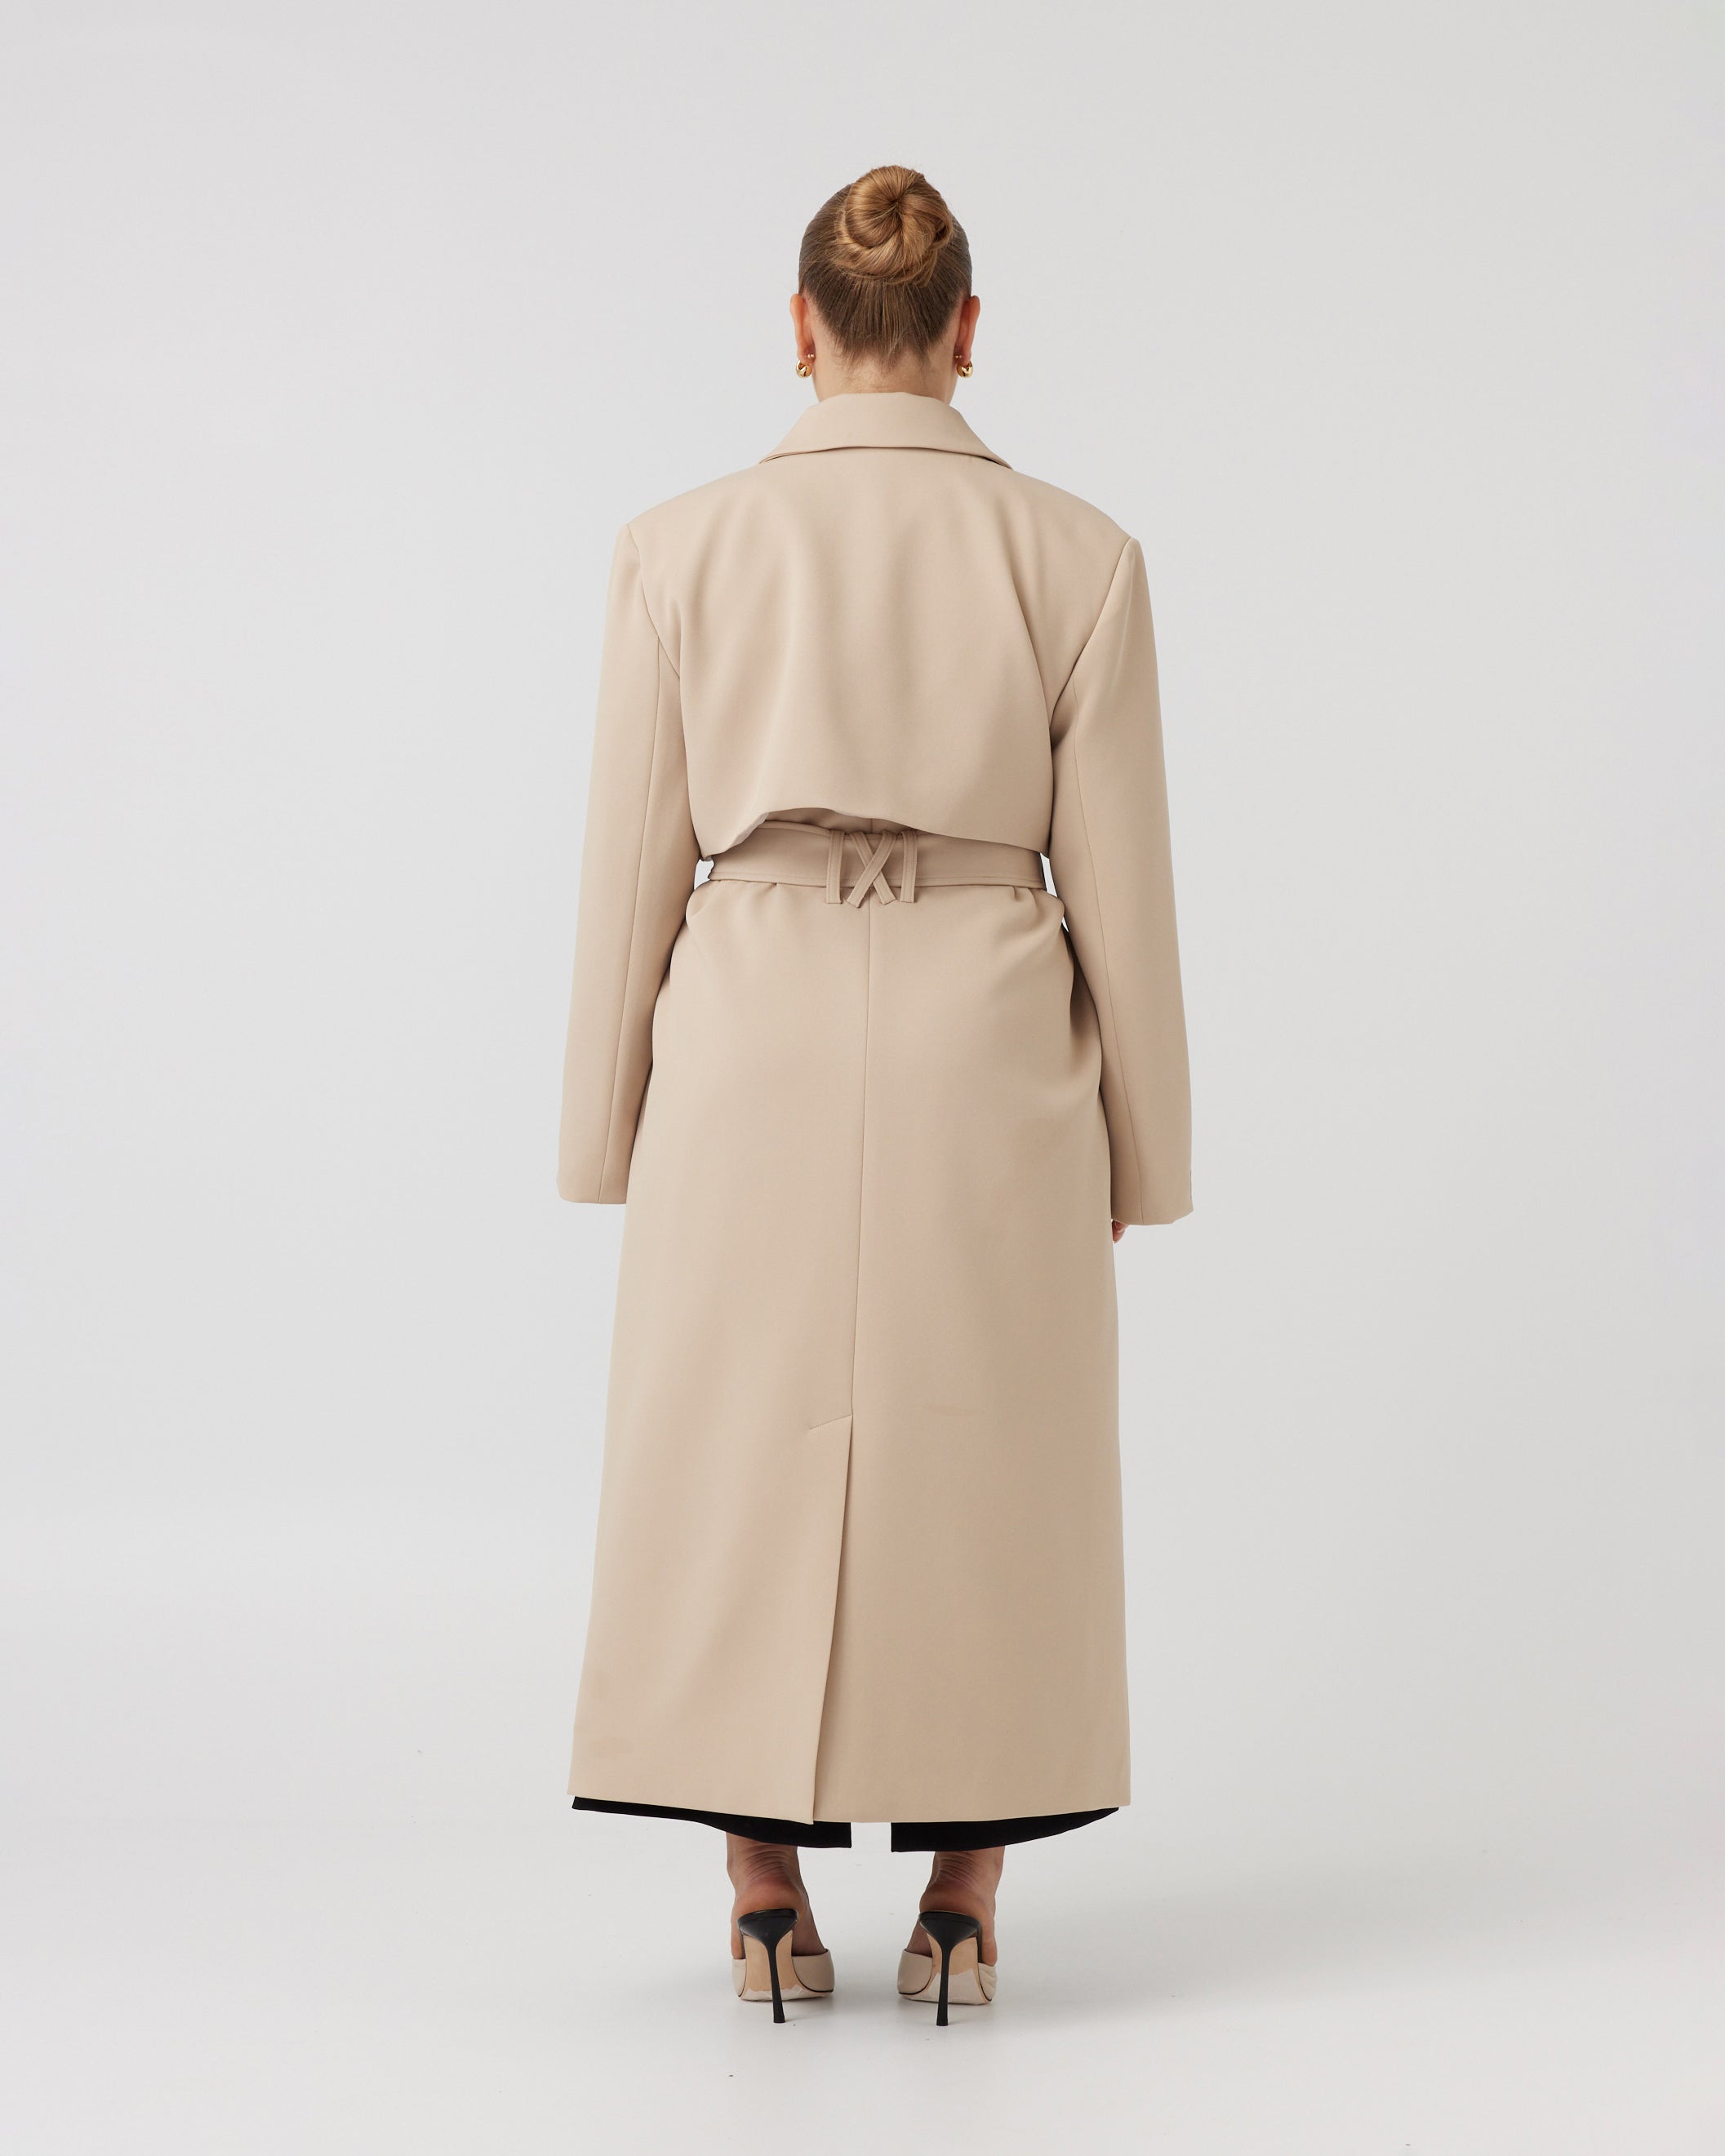 Wide angle back image of a curvaceous woman with dark blonde hair wearing a minimalistic trench coat in taupe tied up around her waist with a matching taupe waist tie. Trench coat flows over her body and cuts just above the ankle.